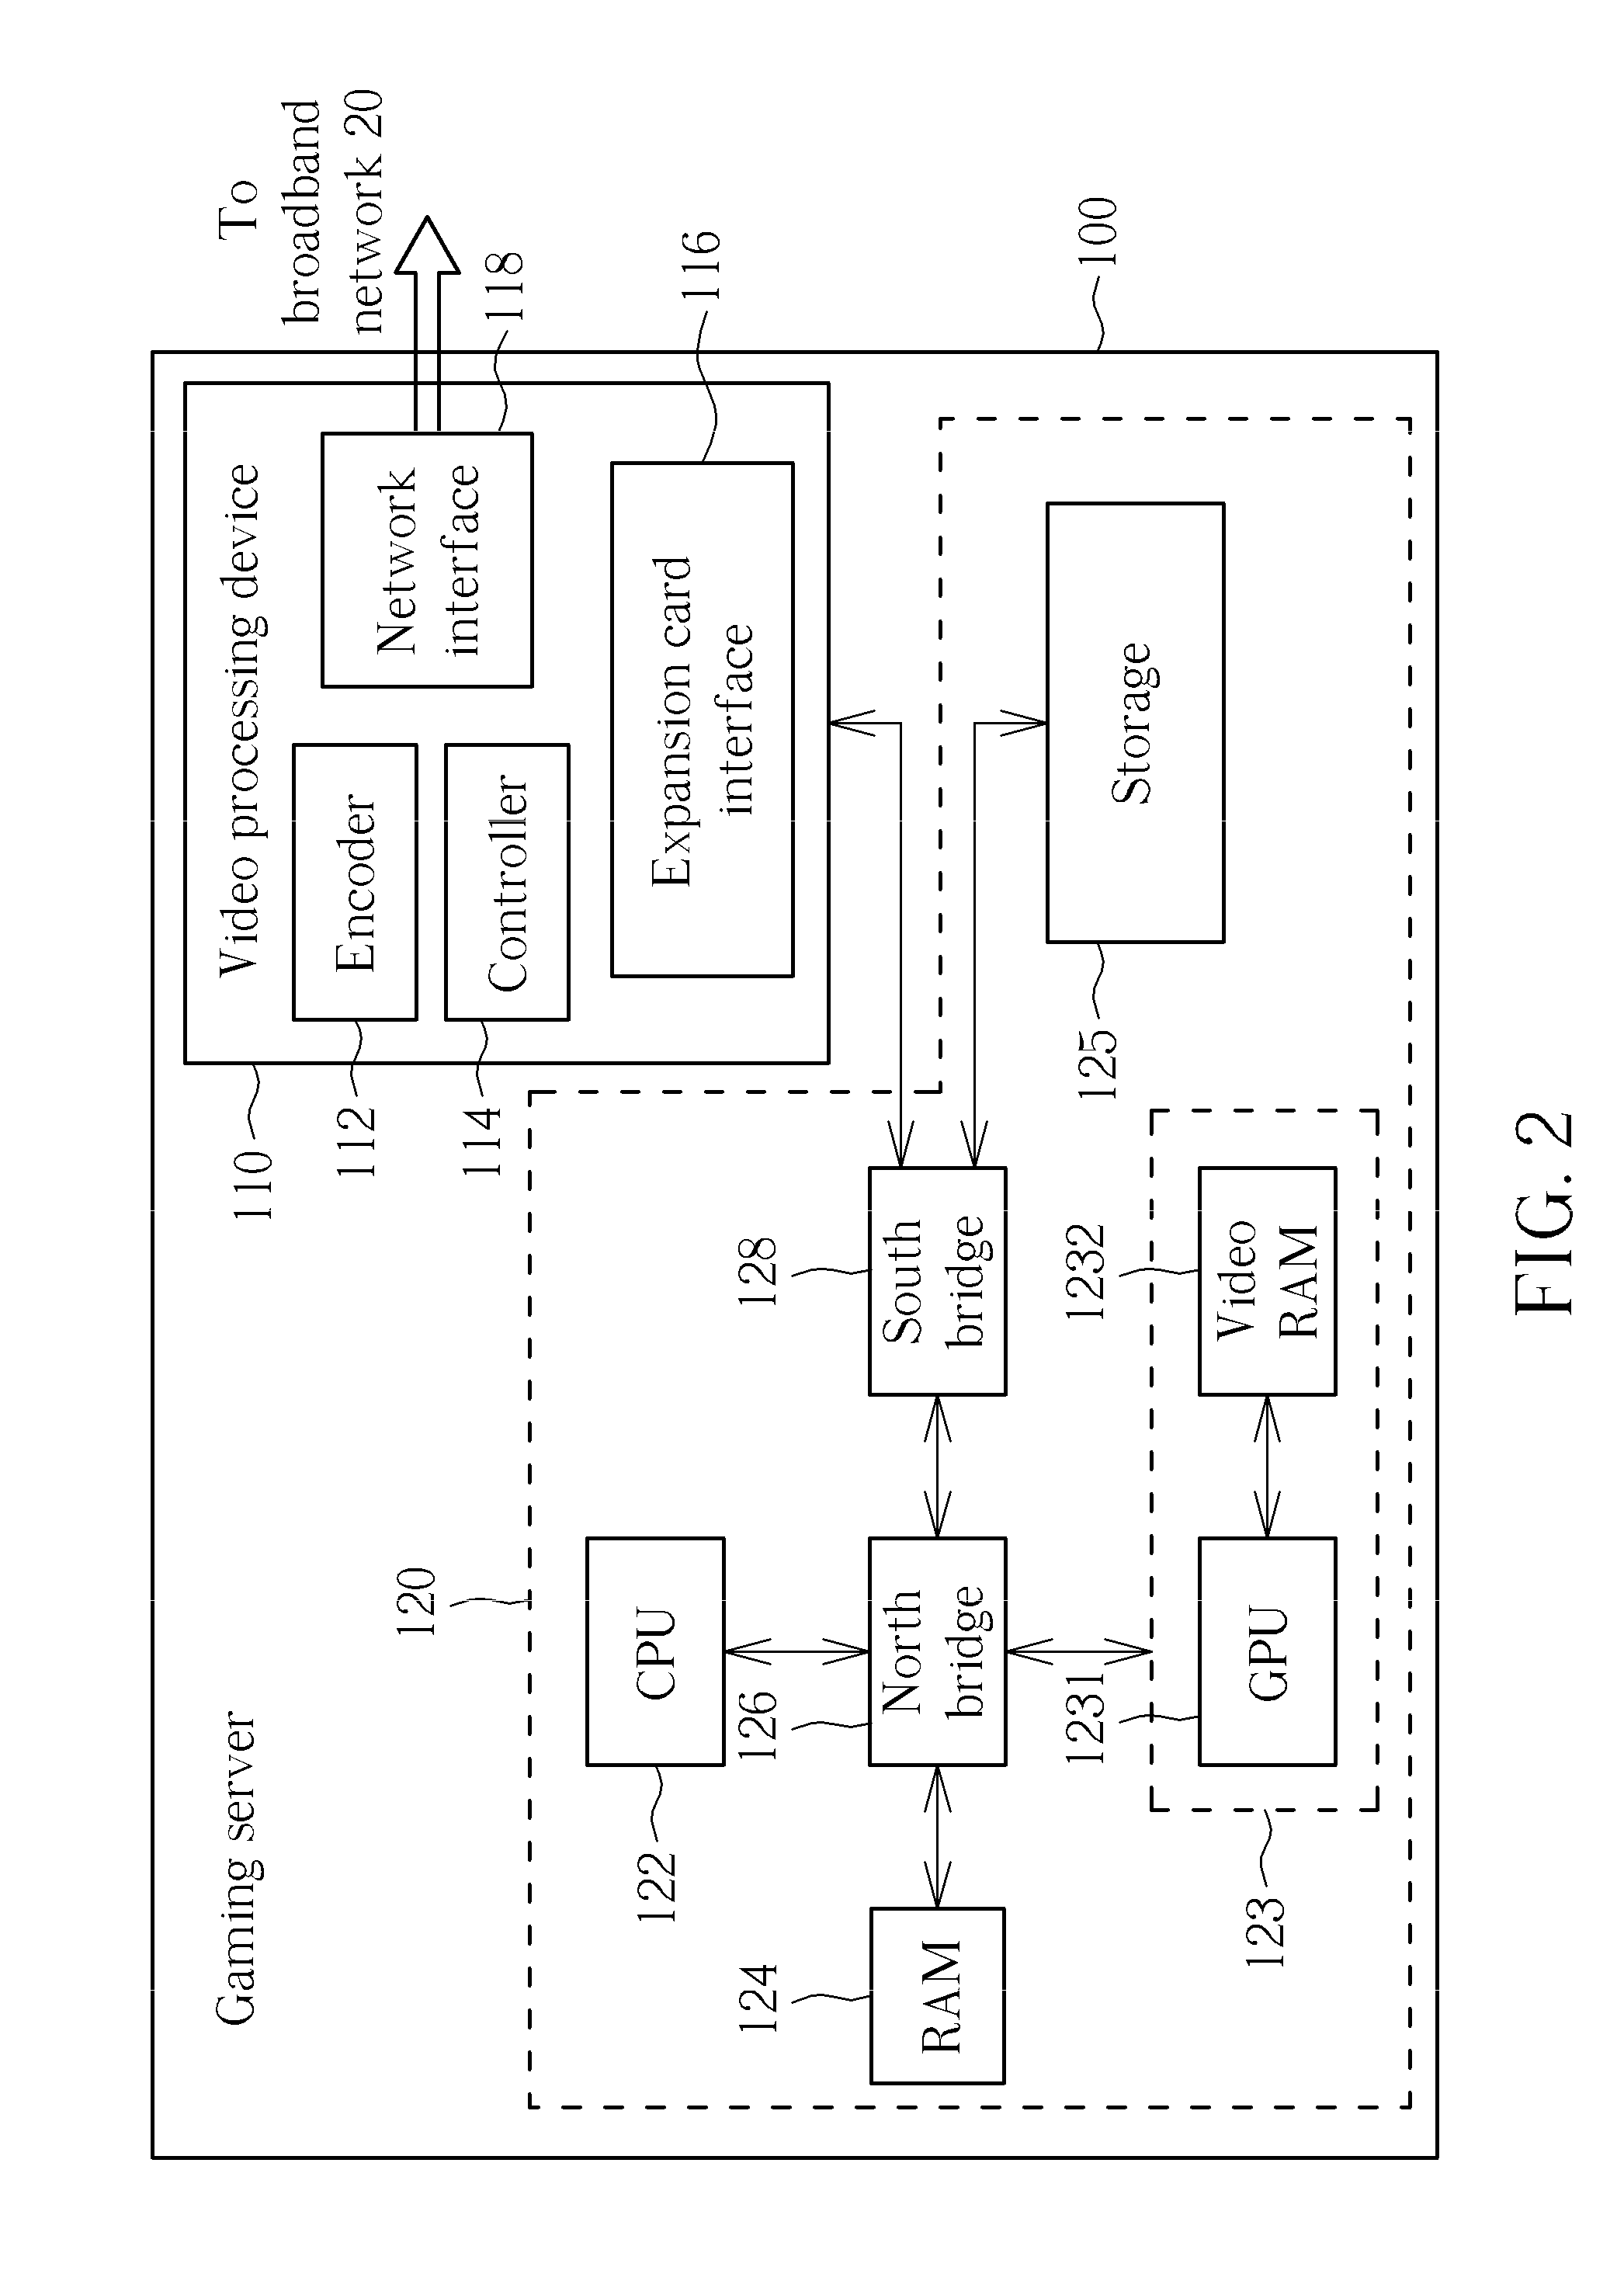 Video processing device, video server, client device, and video client-server system with low latency thereof